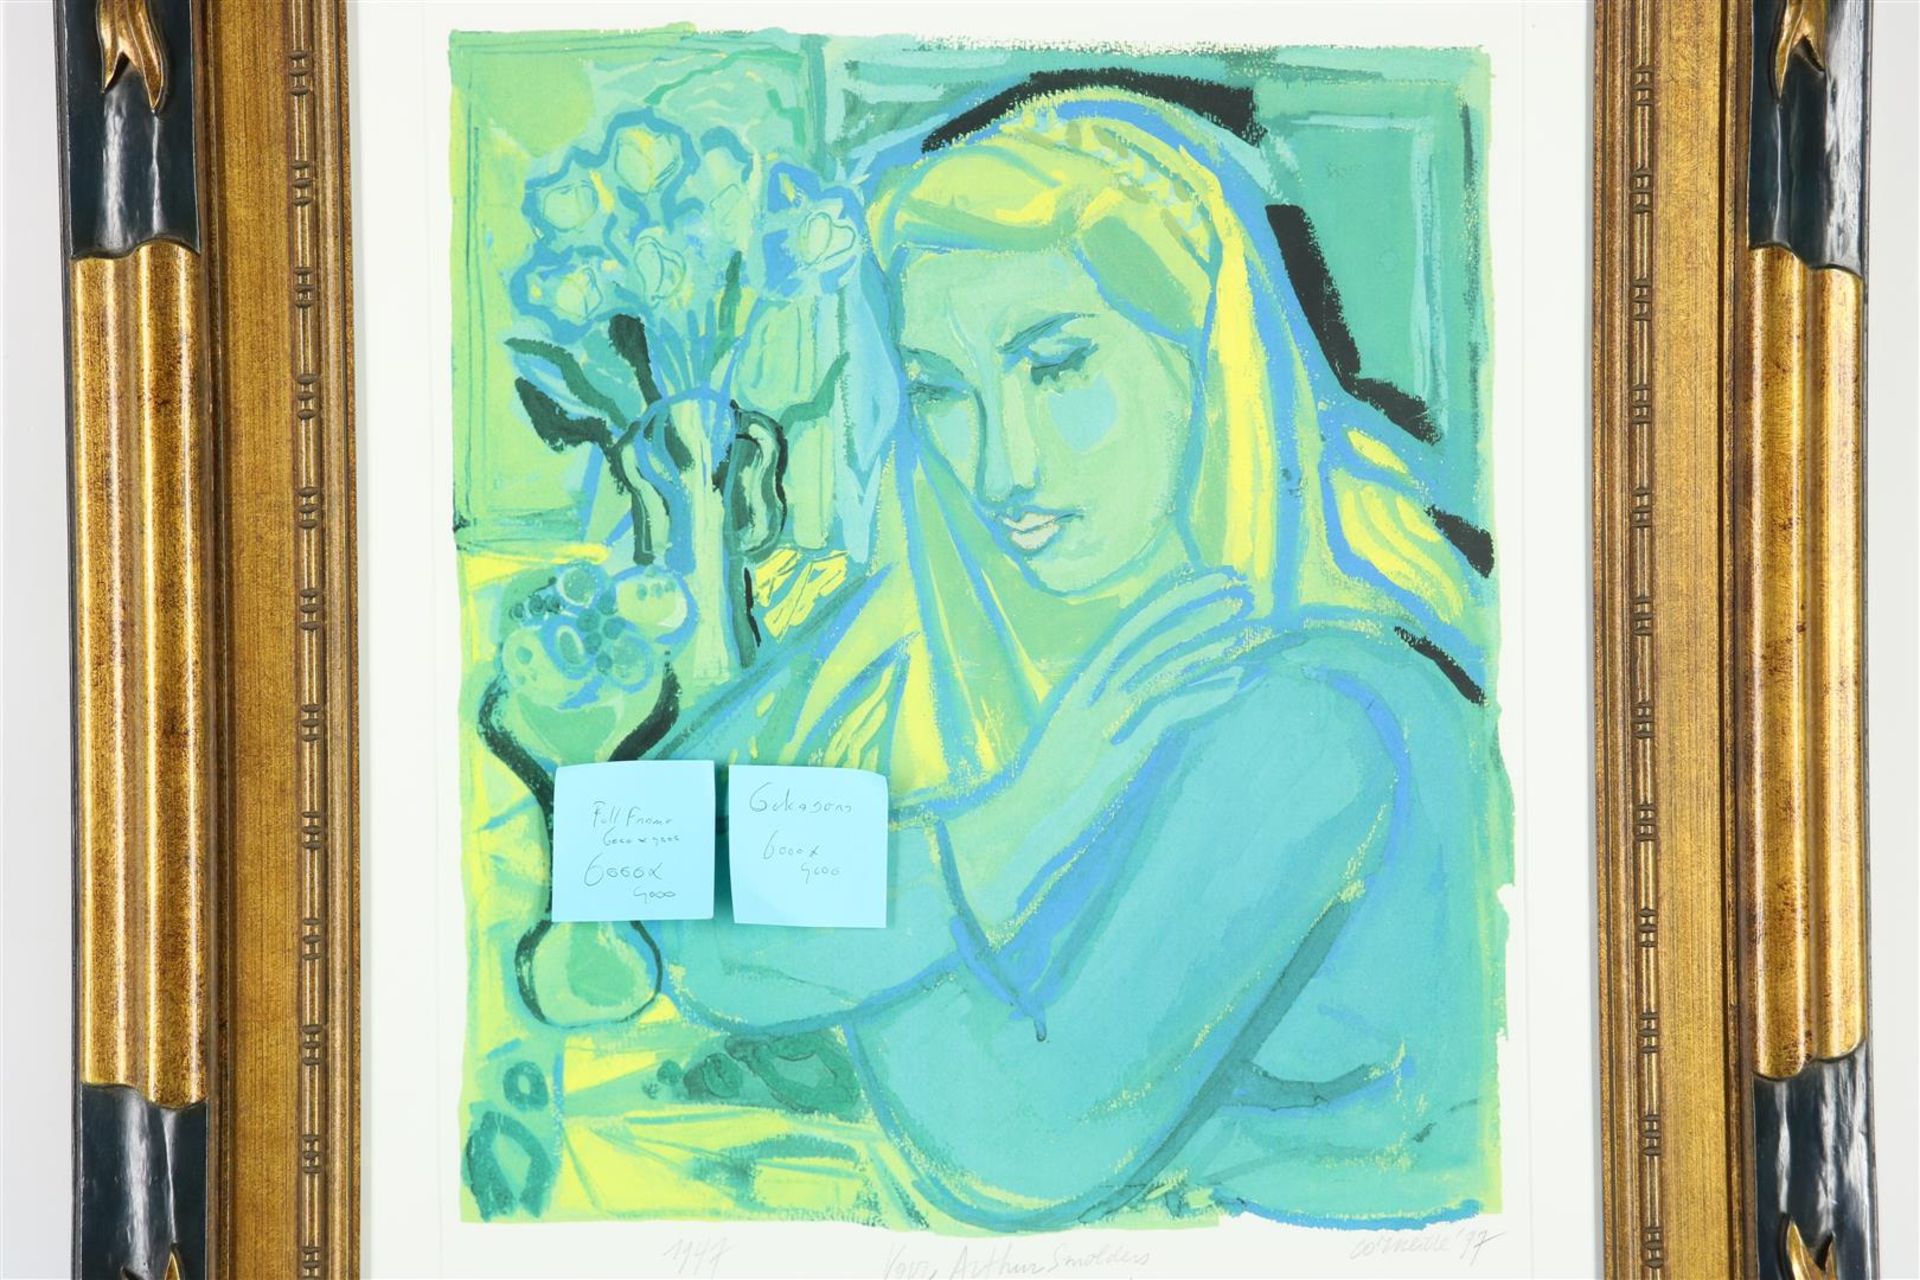 Corneille (Cornelis Guillaume van Beverloo) (1922-2010) Liesje, signed lower right and dated '97, - Image 12 of 17